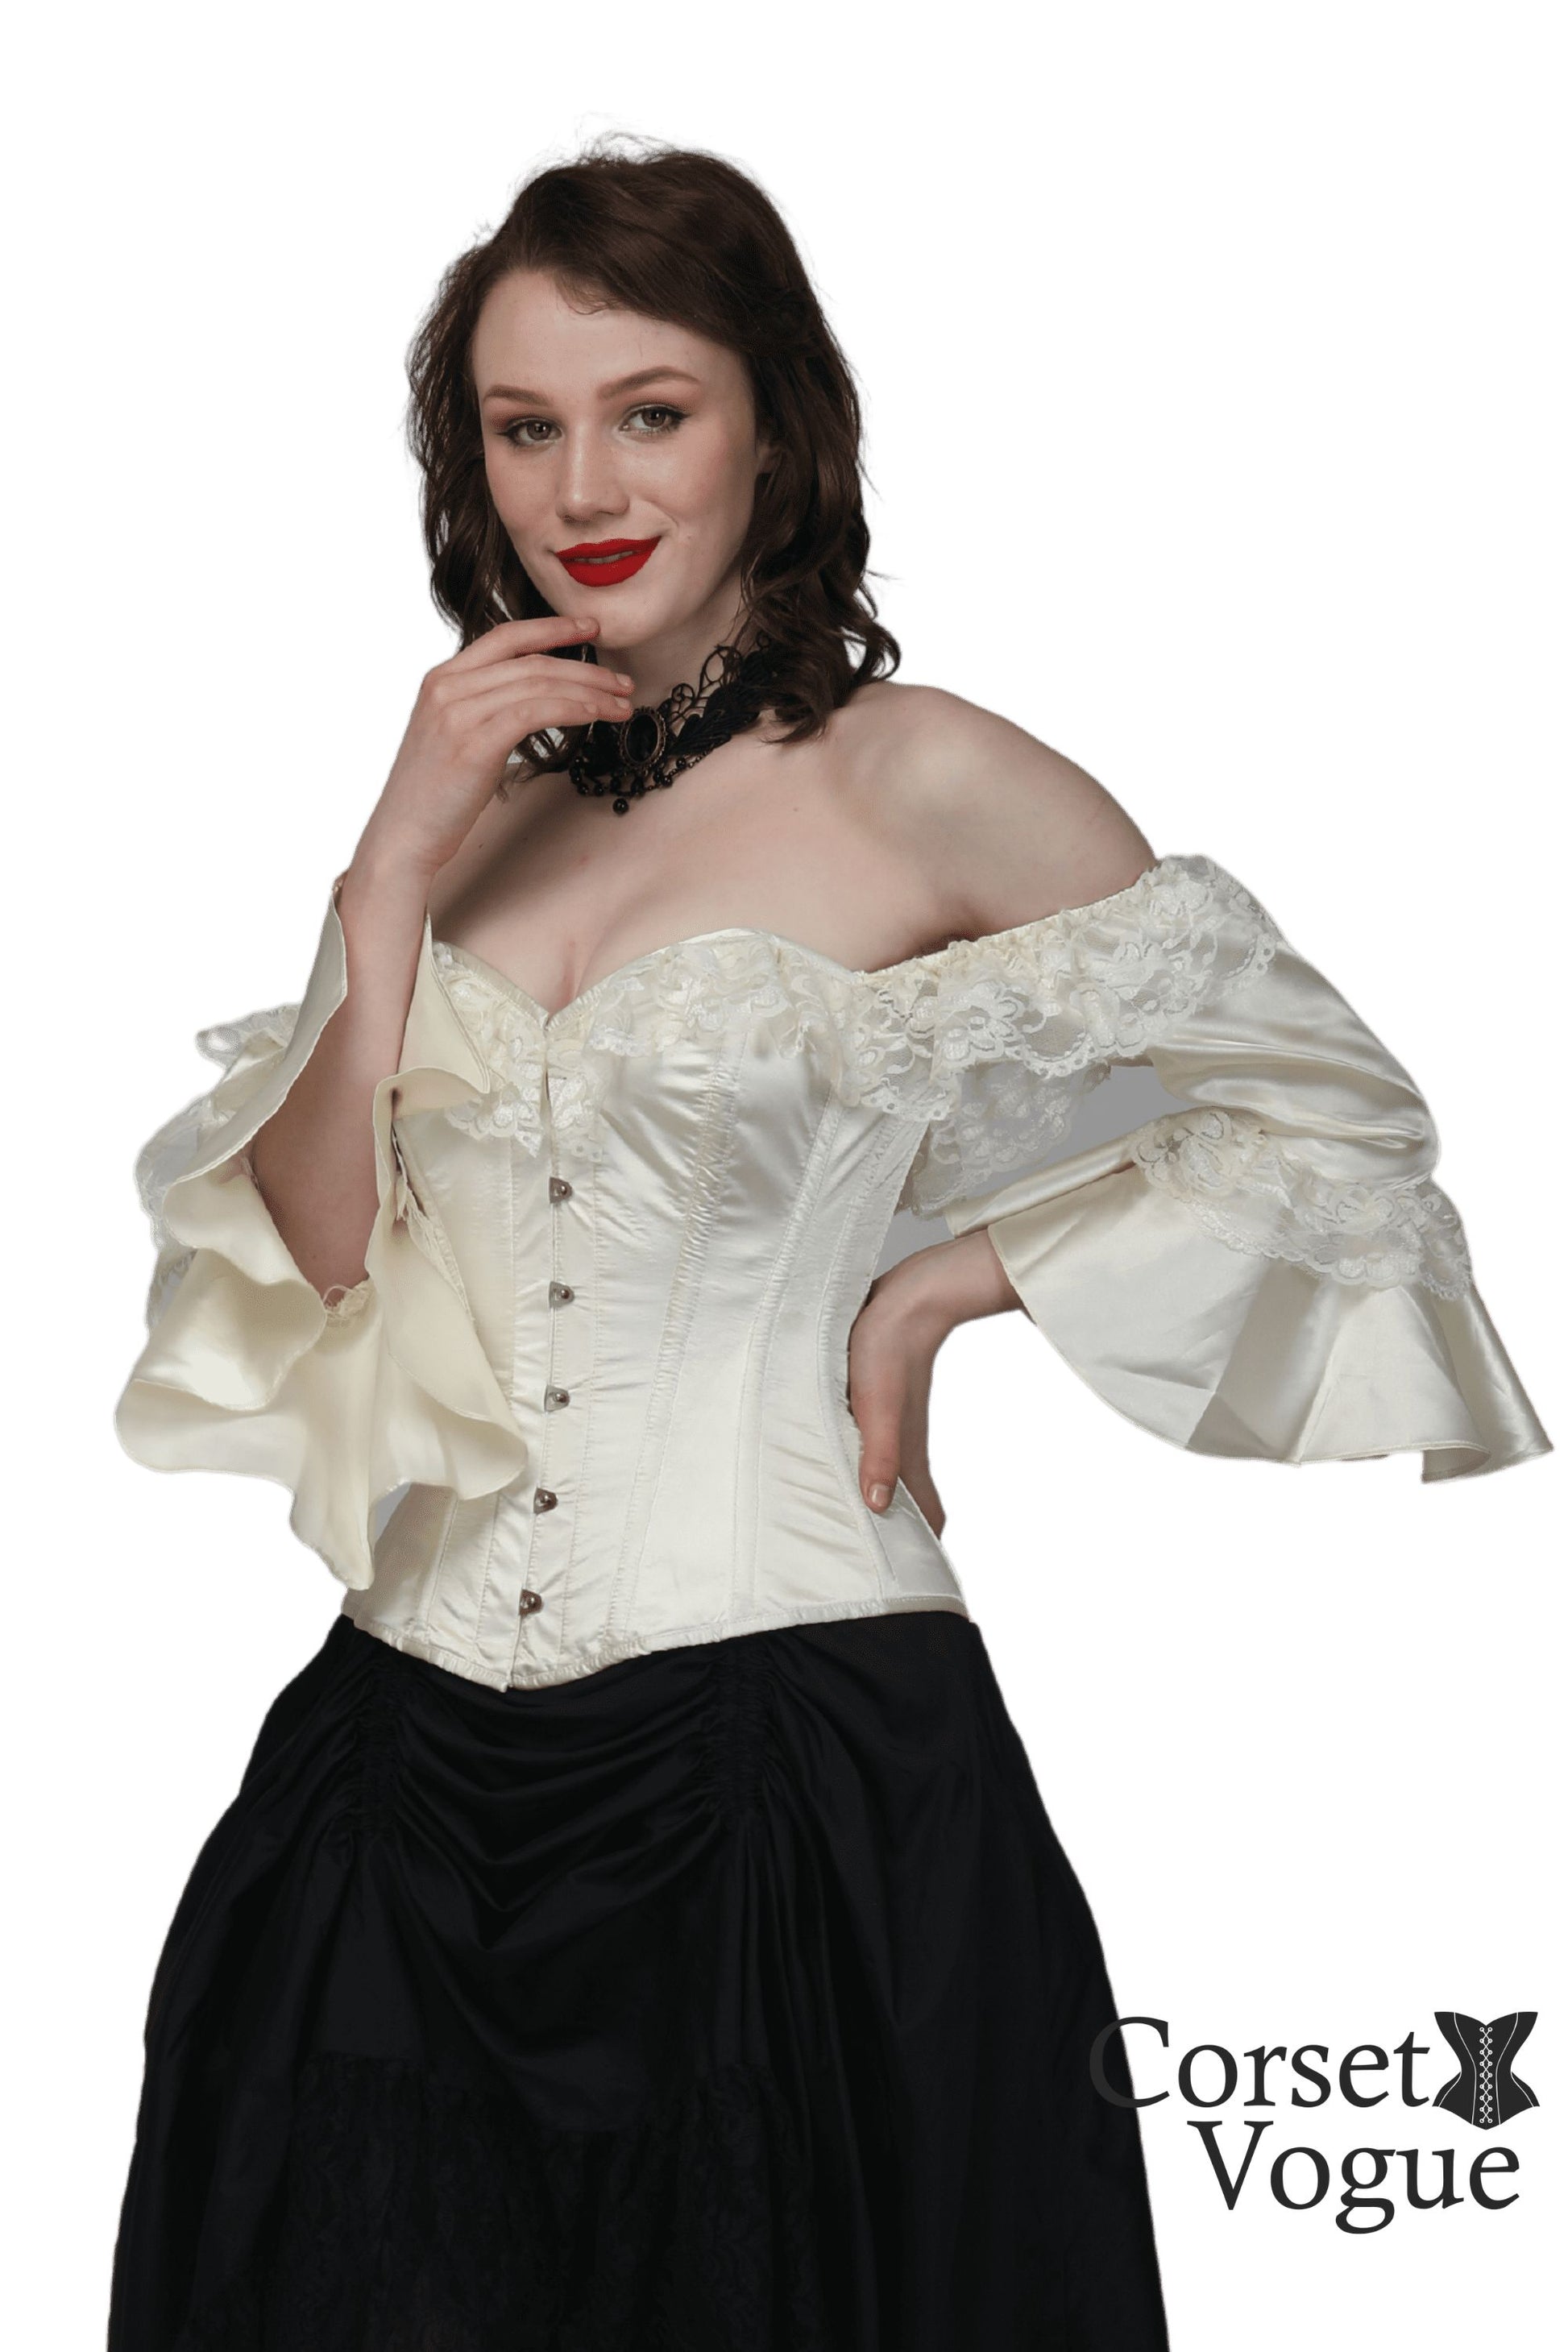 Corset with Sleeve otherside 